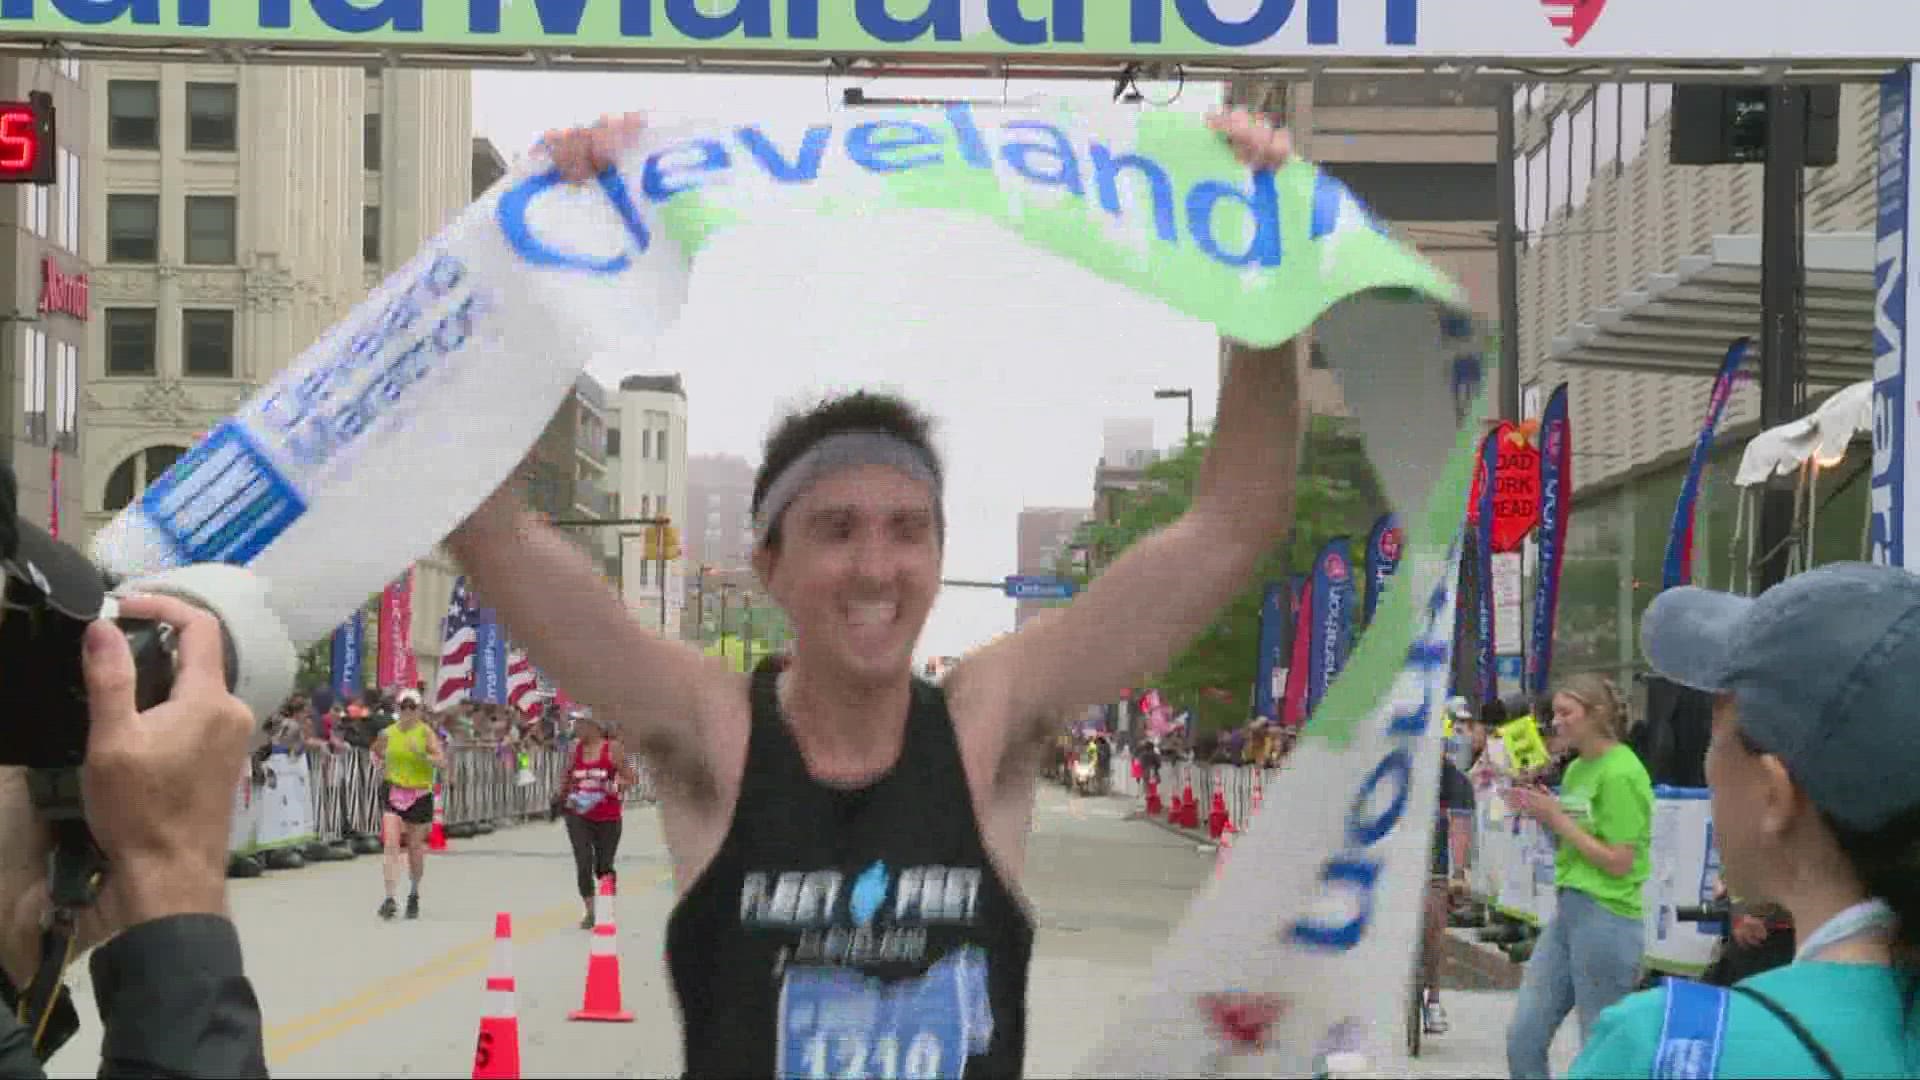 Jeremiah Fitzgerald of Lakewood won the full marathon for a second straight year, while Hudson's Ashton Swinford took home the women's title.